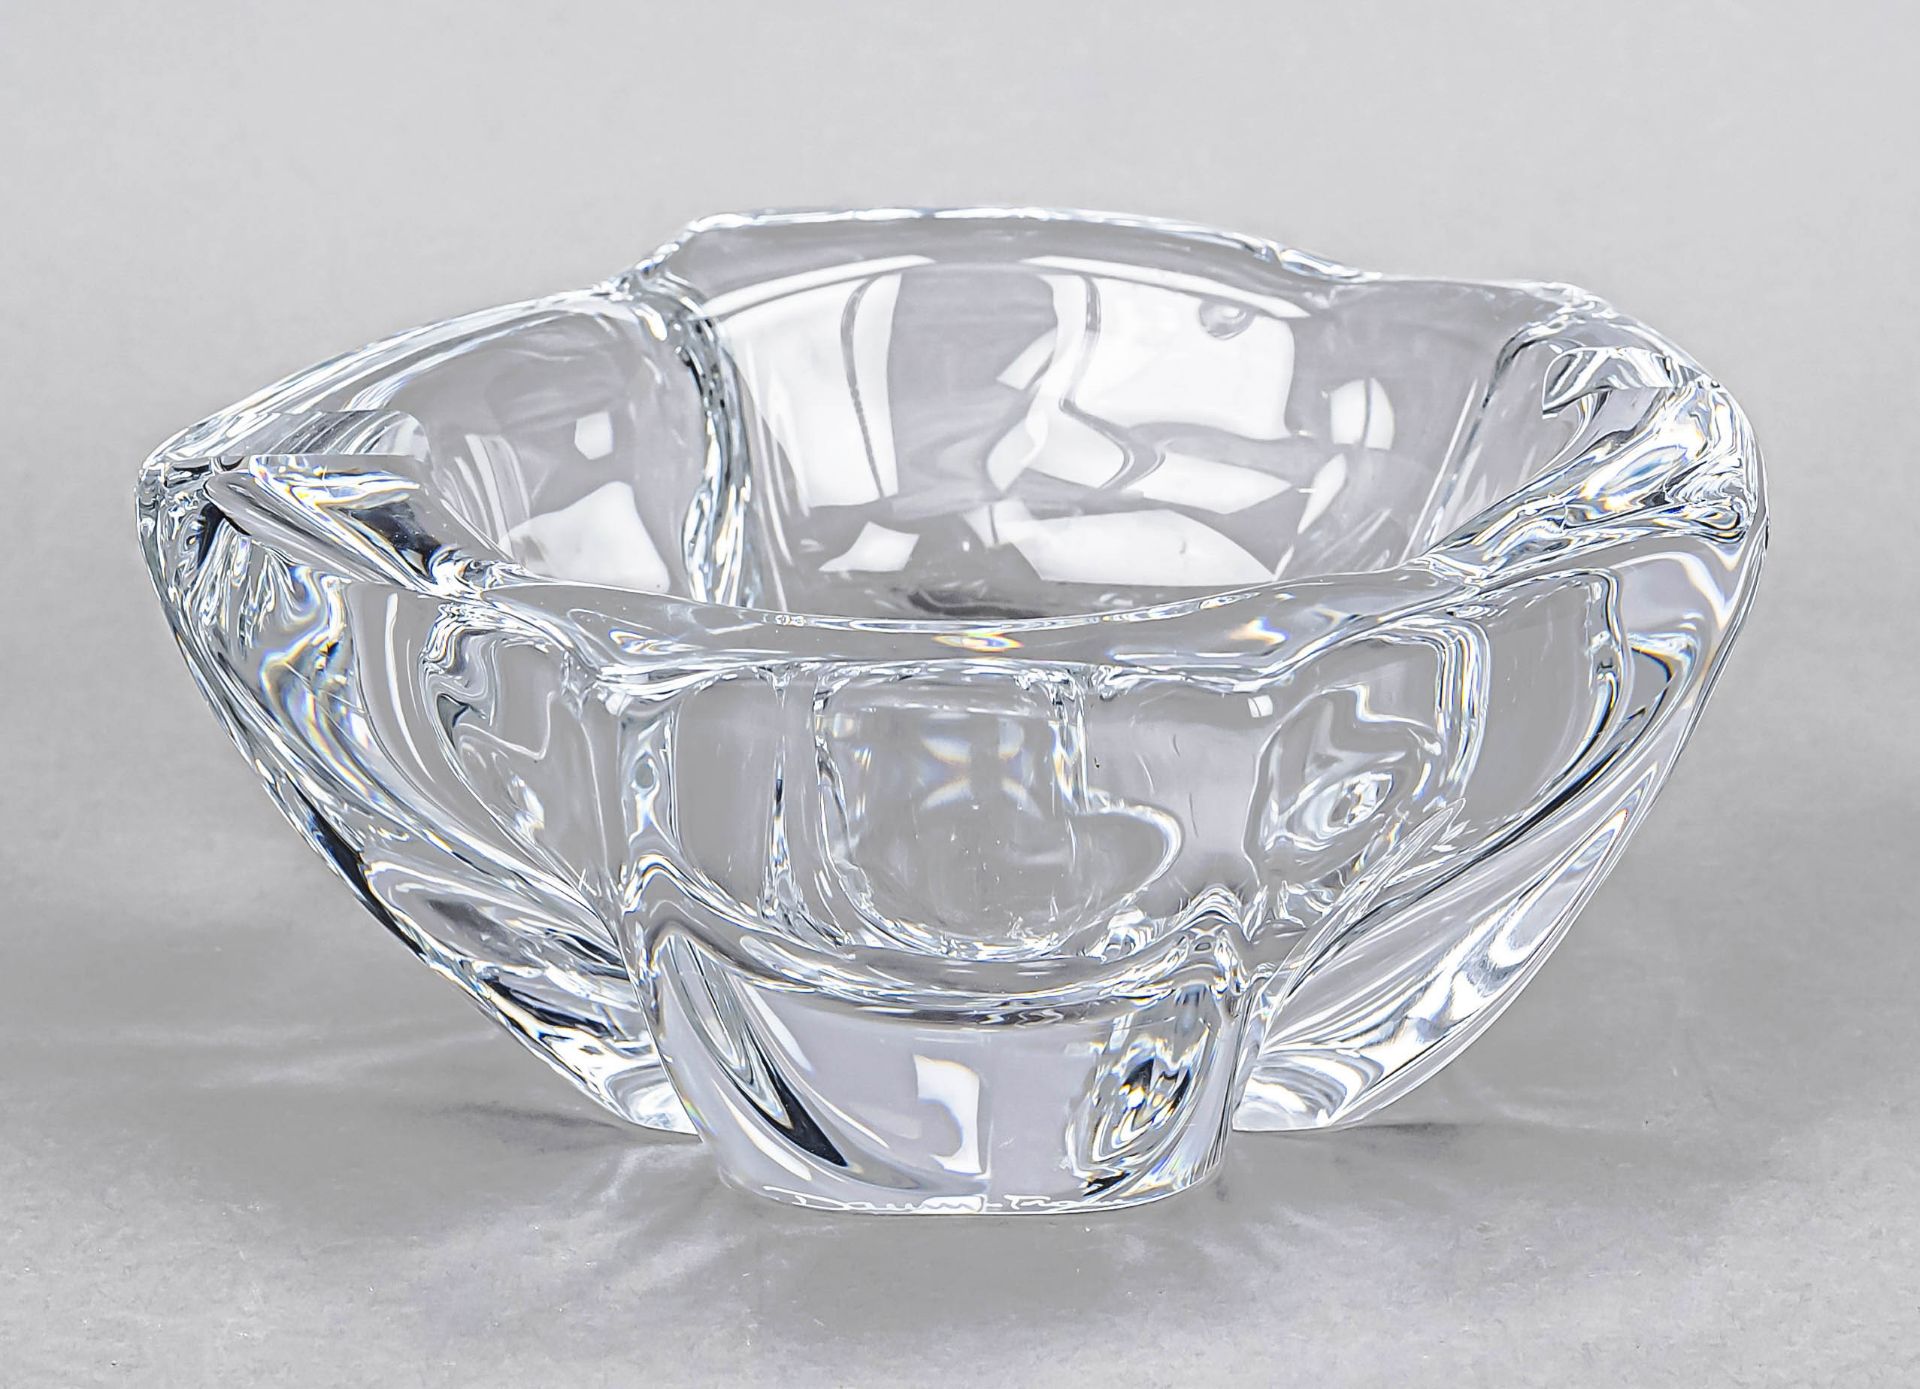 Large ashtray, France, 20th century, Daum, Nancy, hexagonal shape, clear, thick-walled glass,